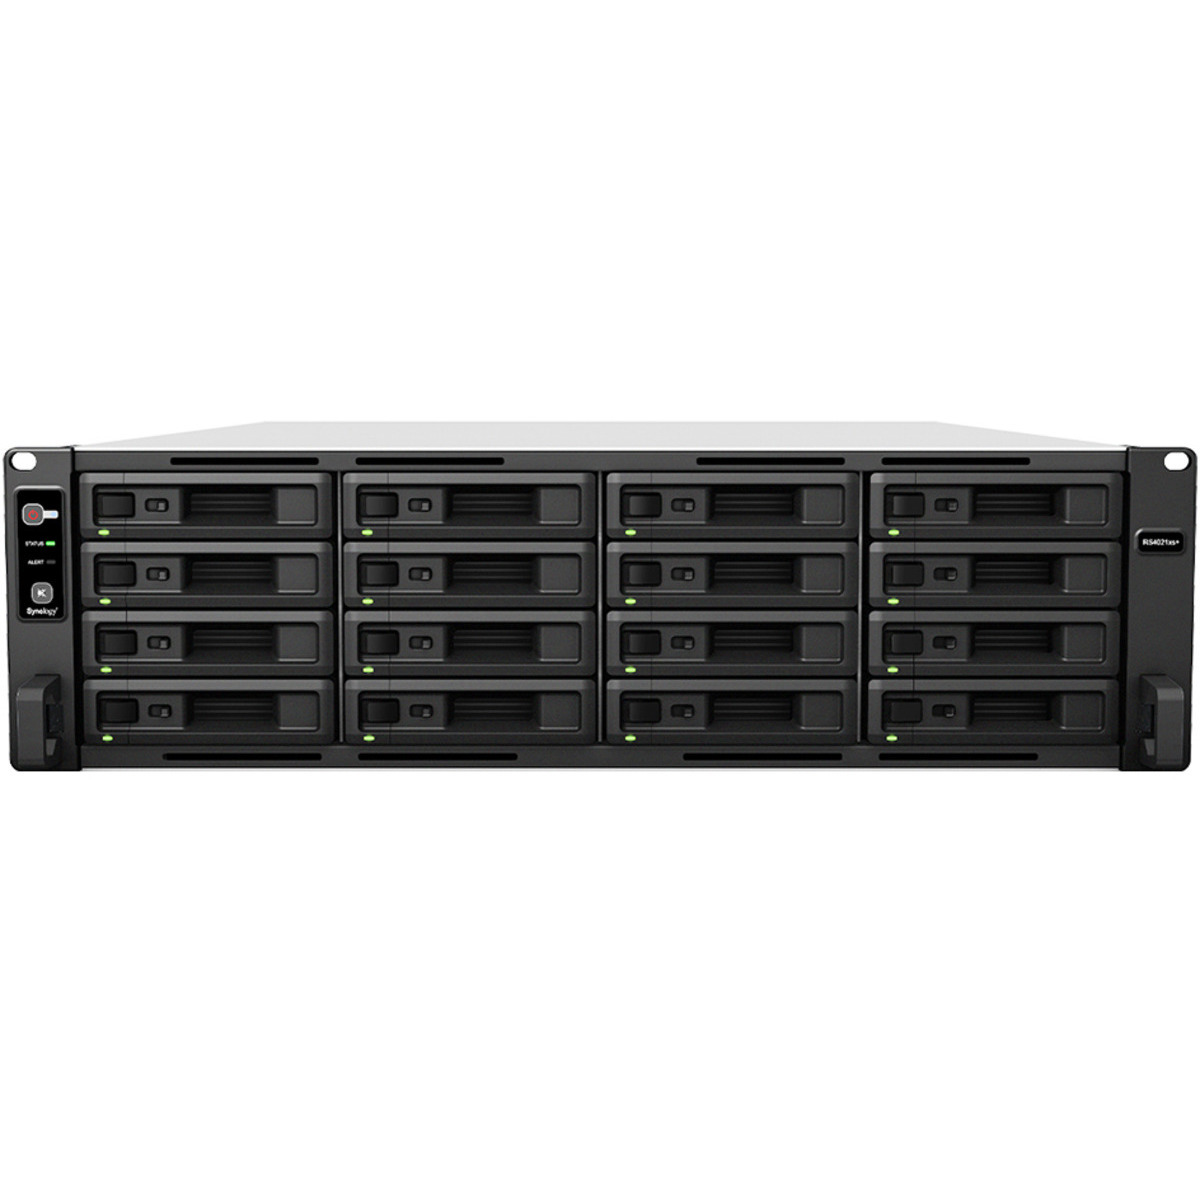 buy Synology RackStation RS4021xs+ 256tb RackMount NAS - Network Attached Storage Device 16x16000gb Seagate IronWolf Pro ST16000NT001 3.5 7200rpm SATA 6Gb/s HDD NAS Class Drives Installed - Burn-In Tested - ON SALE - nas headquarters buy network attached storage server device das new raid-5 free shipping simply usa RackStation RS4021xs+